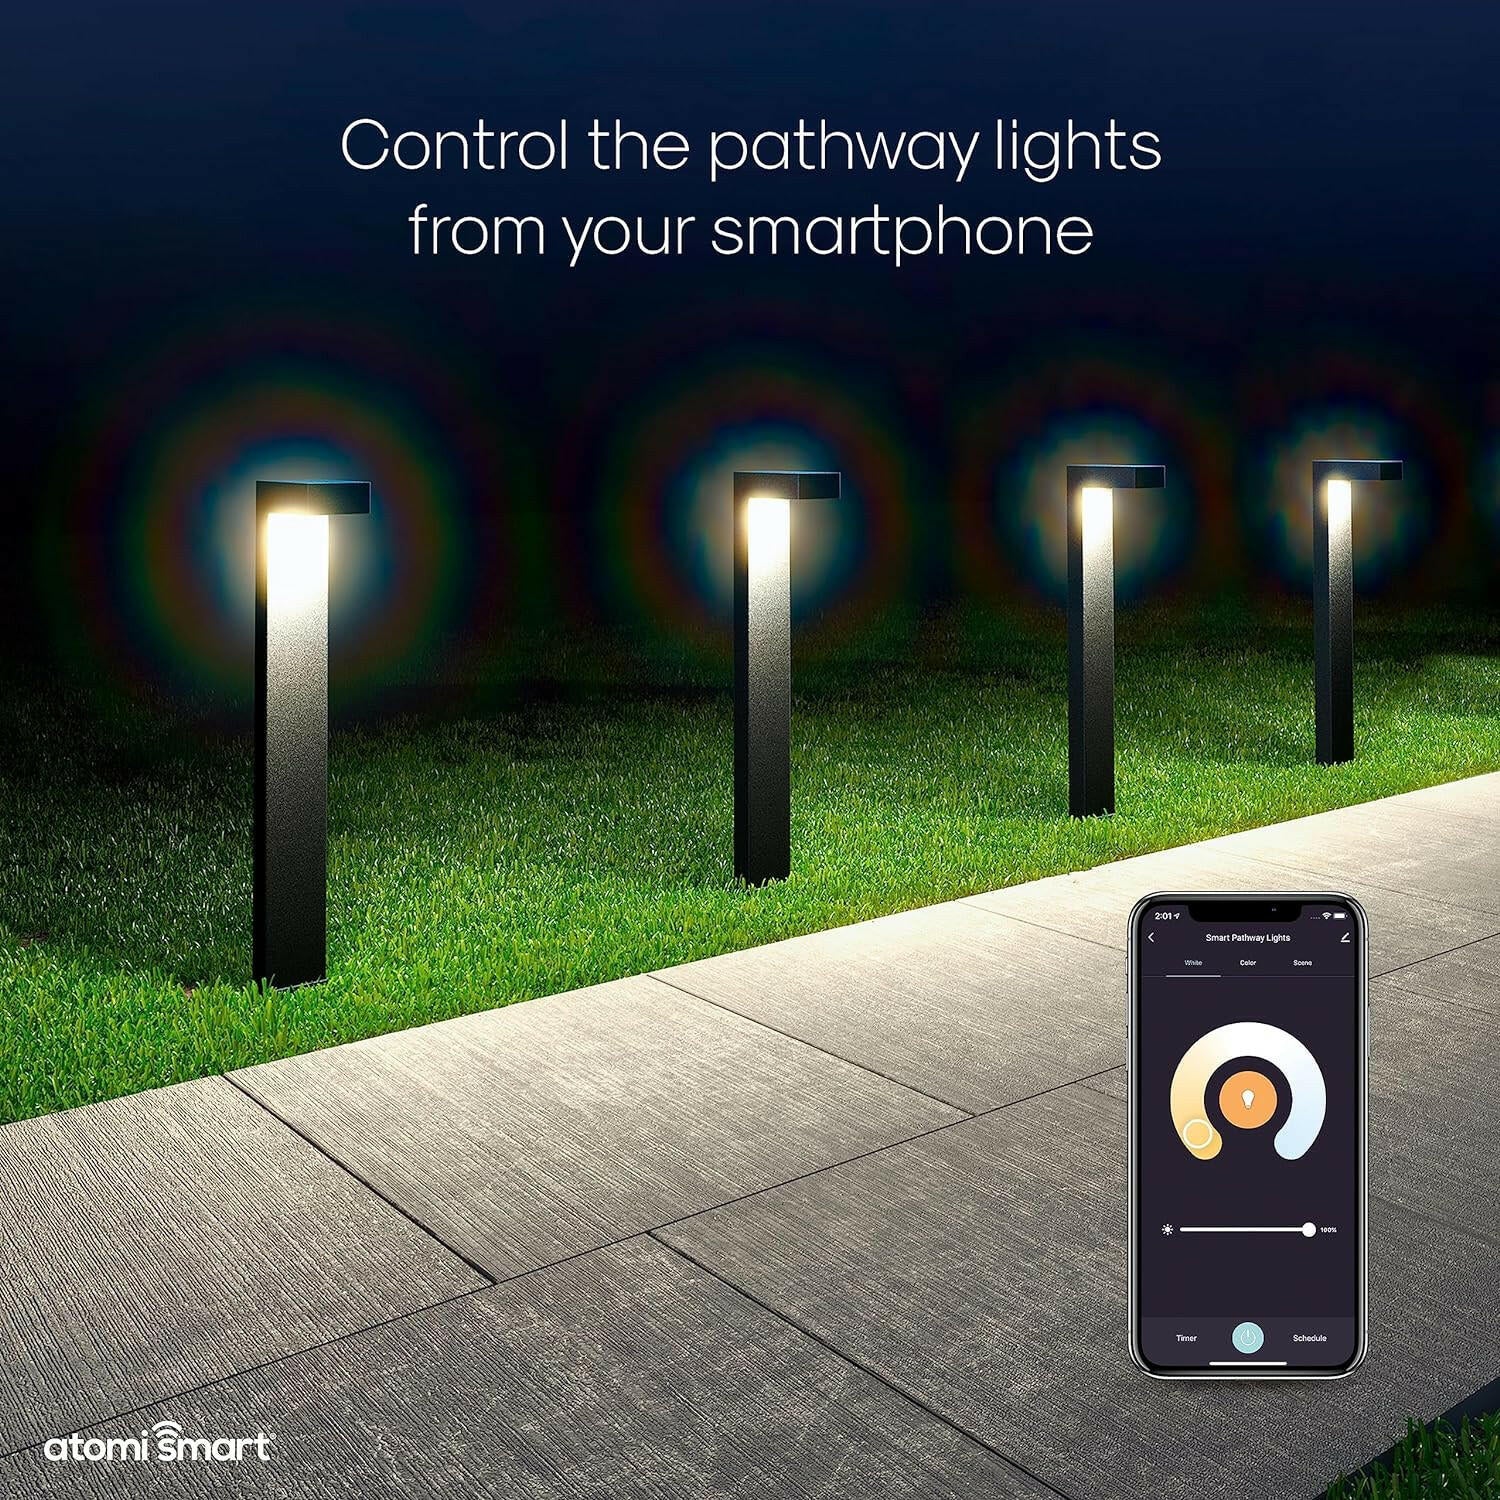 Atomi Smart WiFi LED Pathway Lights 4-Pack